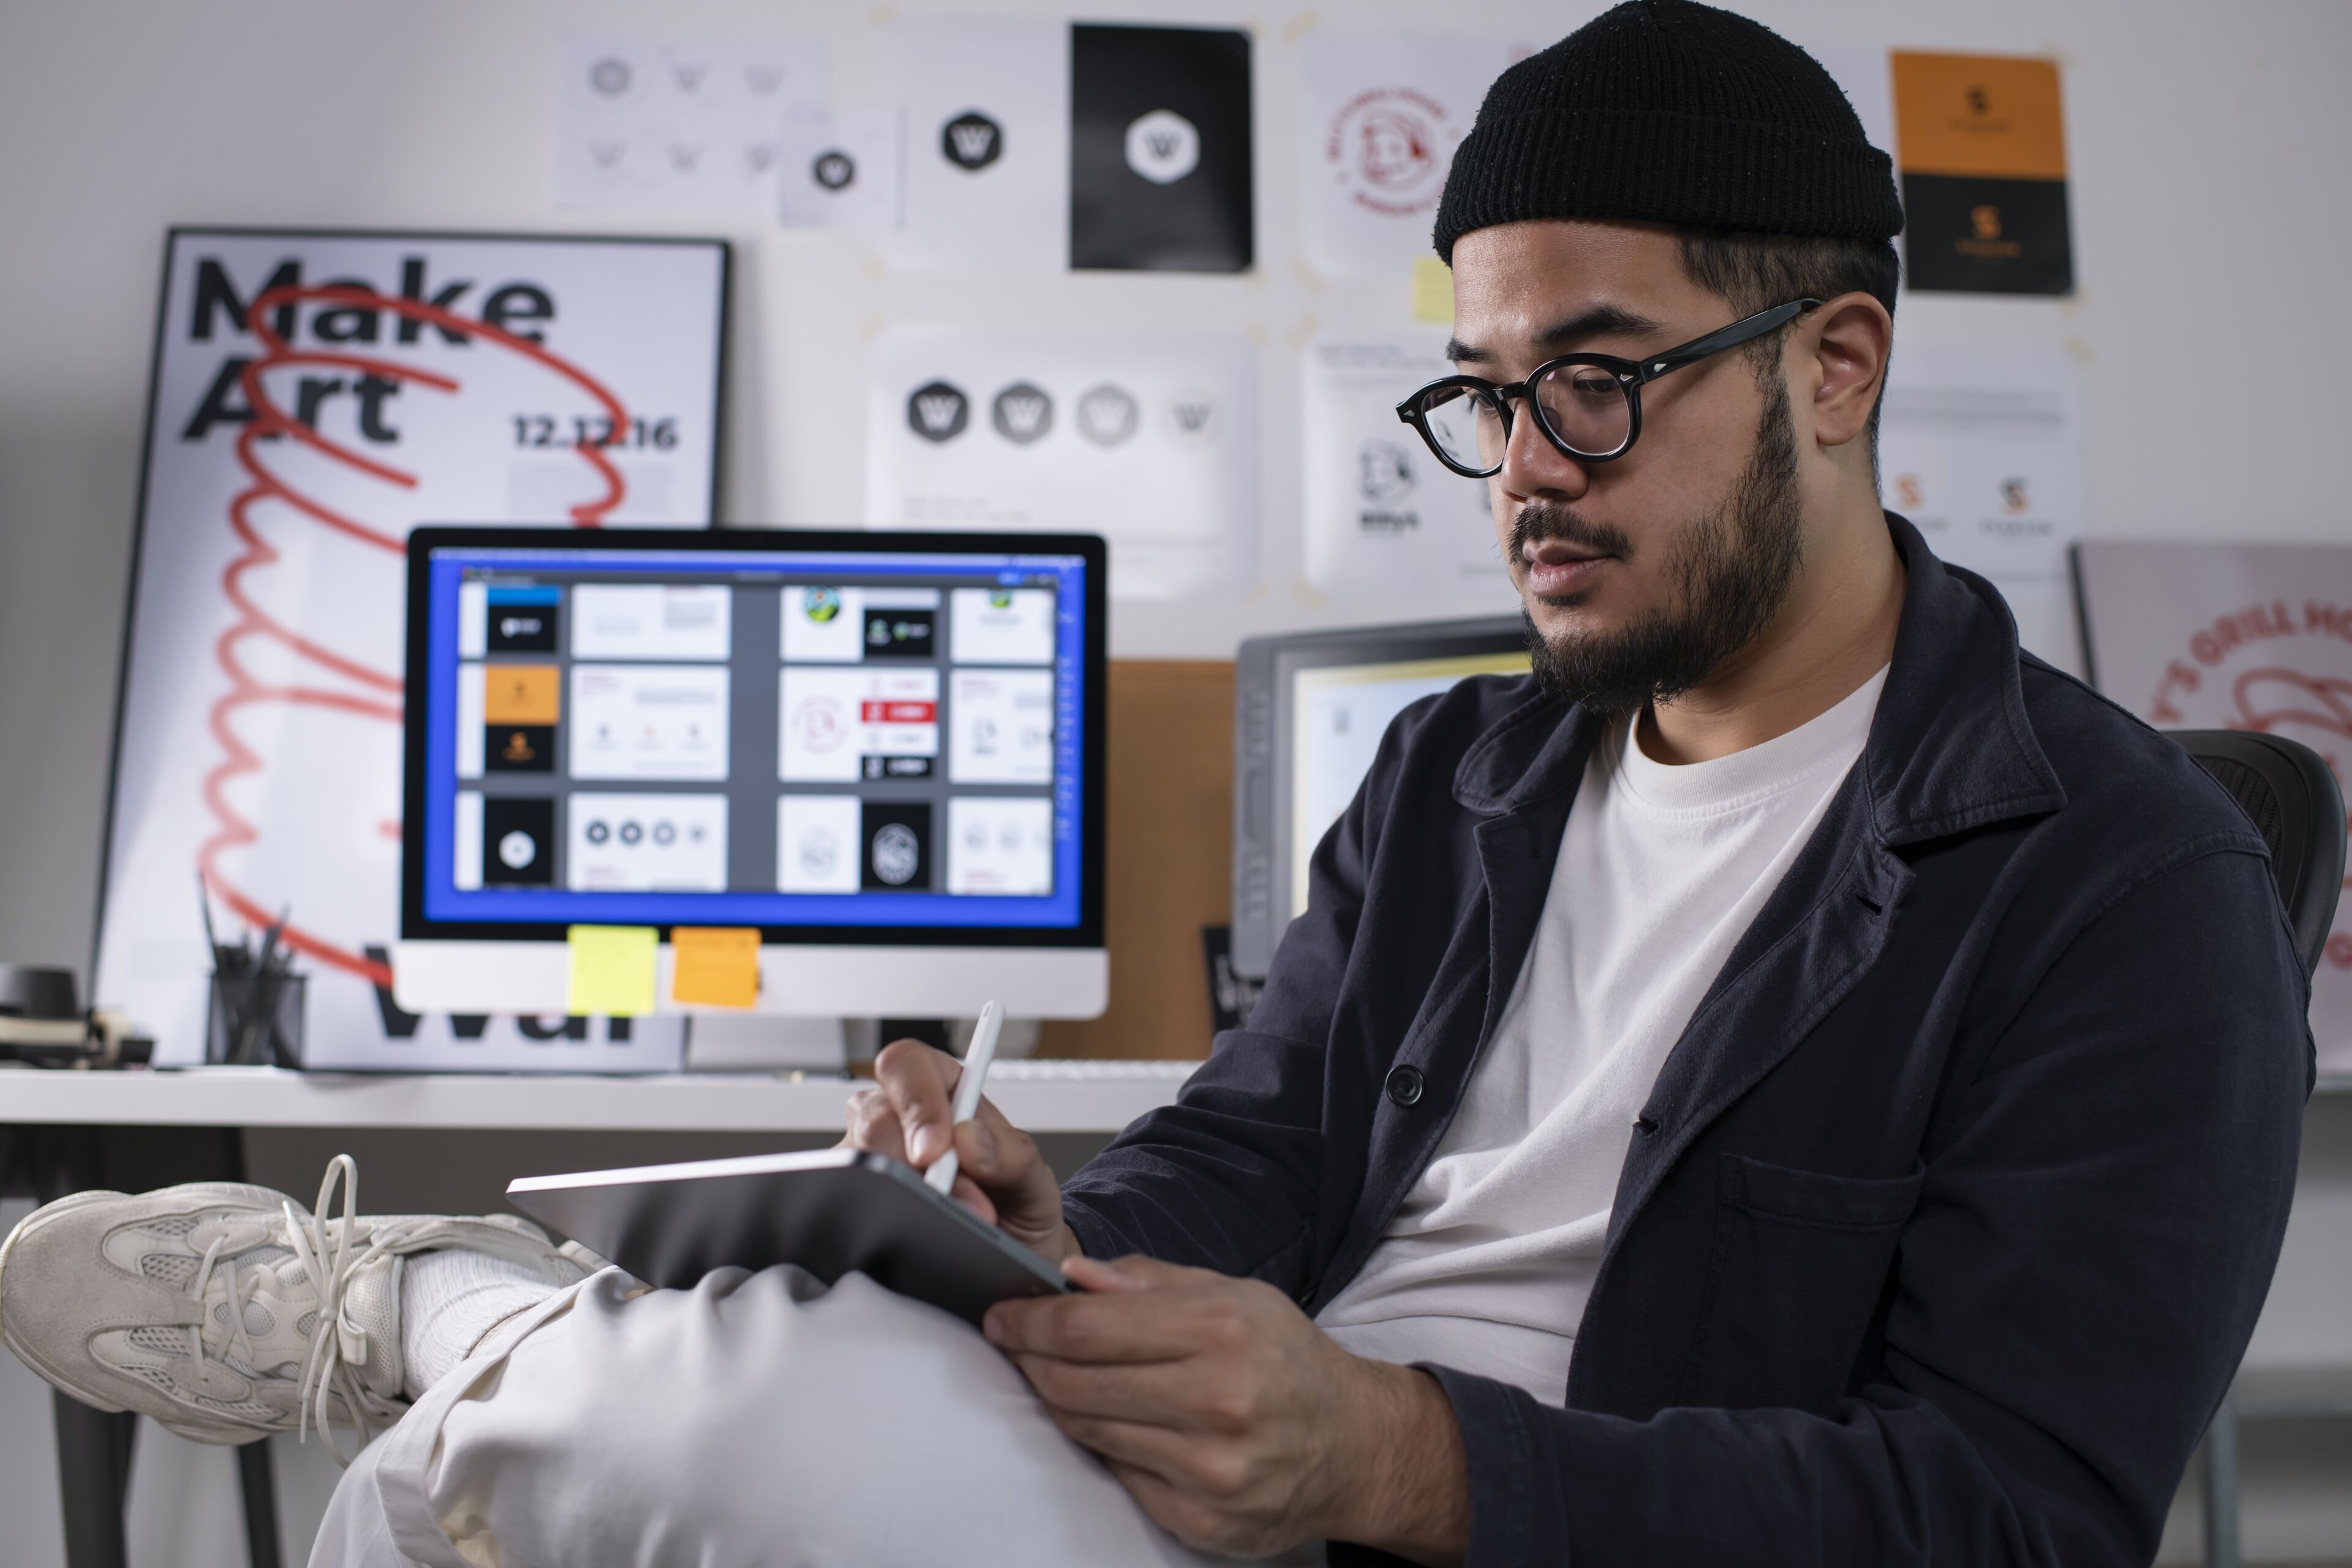 ImageA focused male digital artist sketches on a tablet in a creative studio, surrounded by design inspirations.